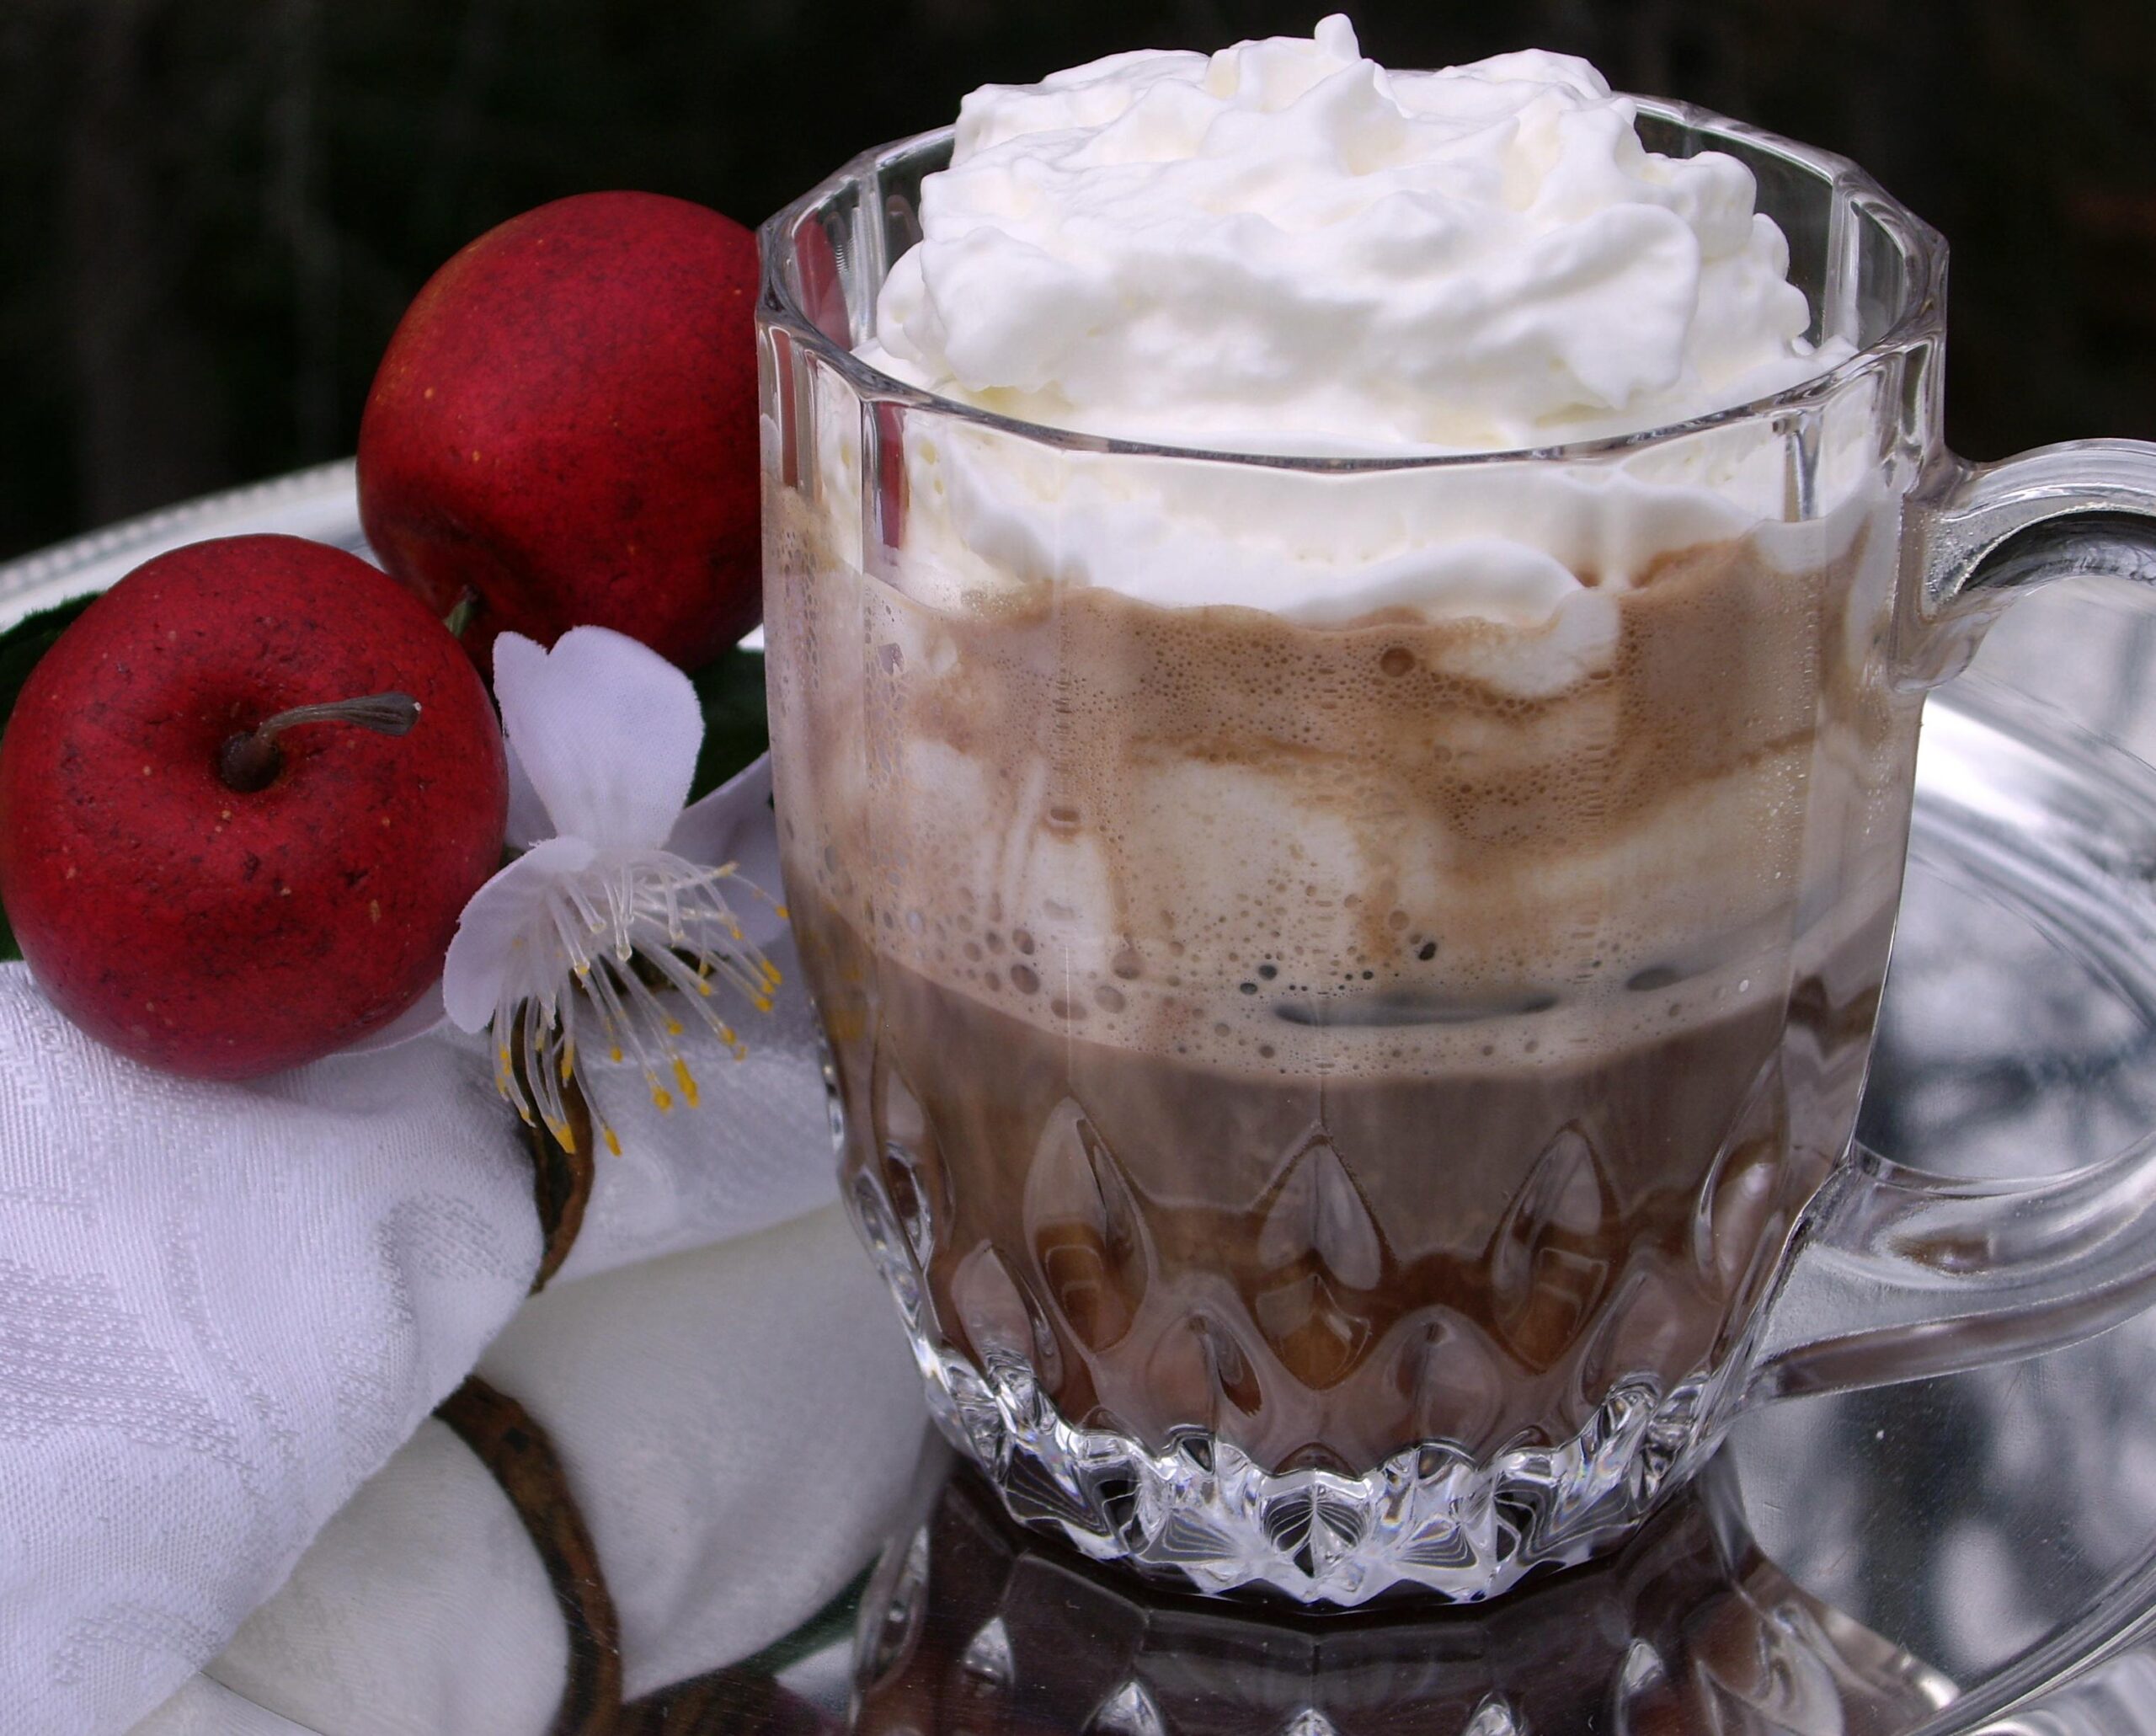  Satisfy your craving for caffeine and chocolate with this icy delight!